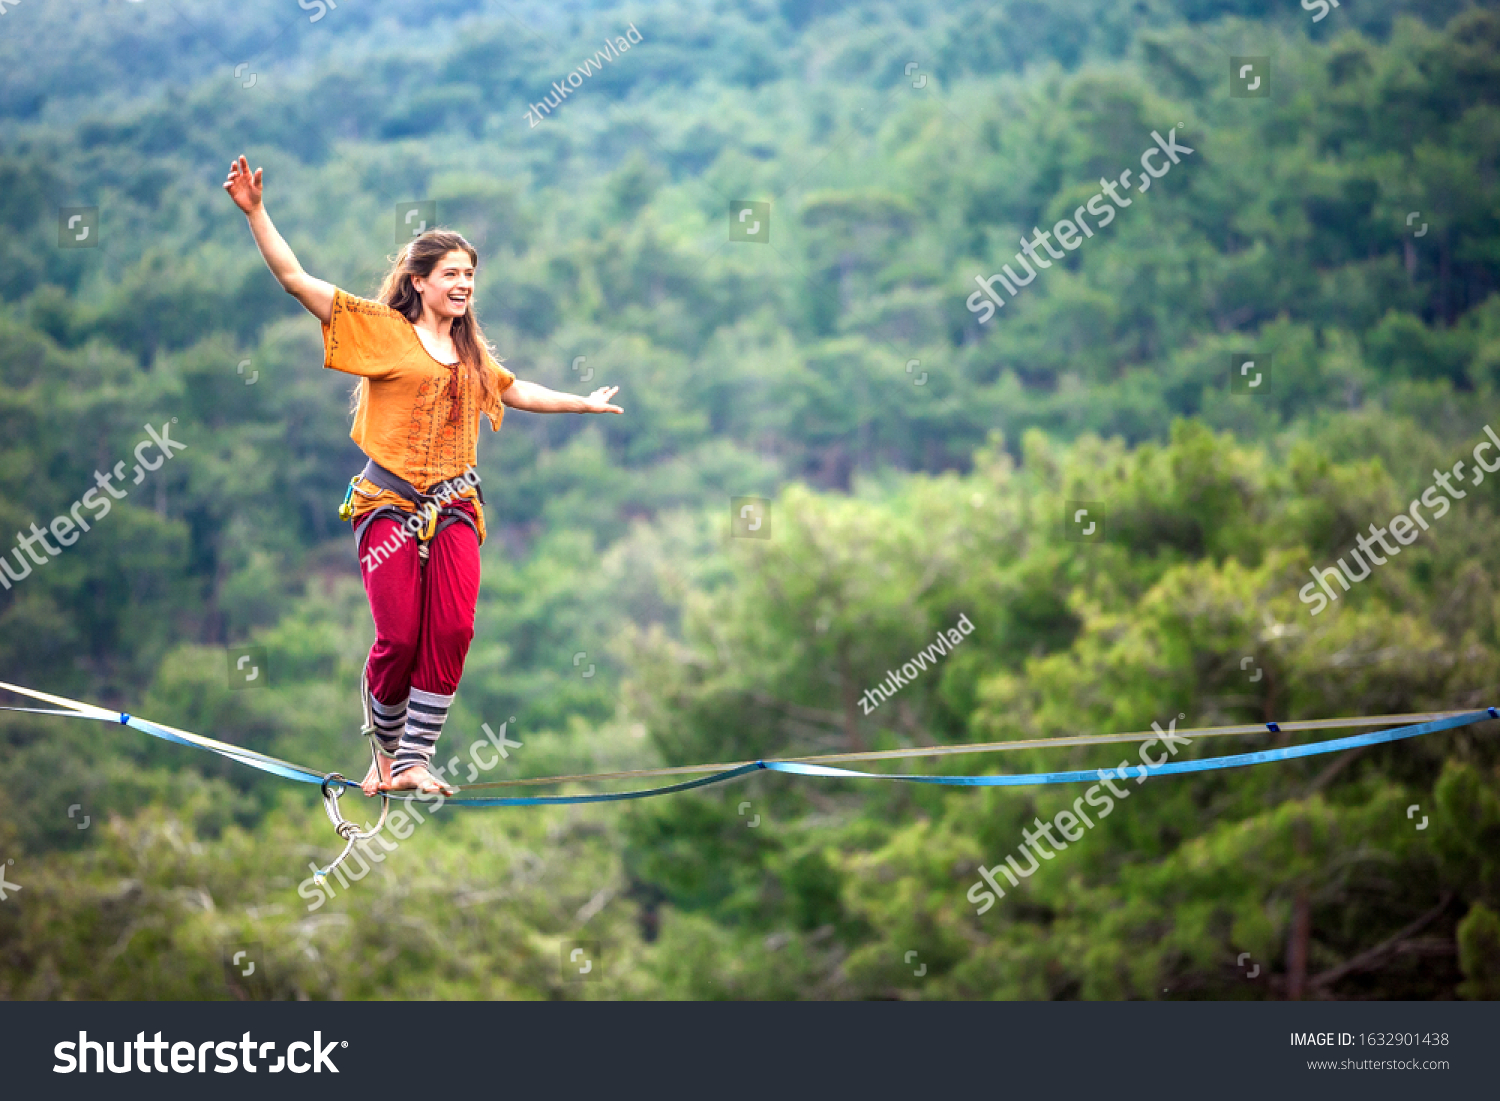 Highliner on a rope. Highline on a background of mountains. Extreme sport on the nature. Balancing on the sling. Equilibrium at altitude. A woman catches balance on the line.  #1632901438